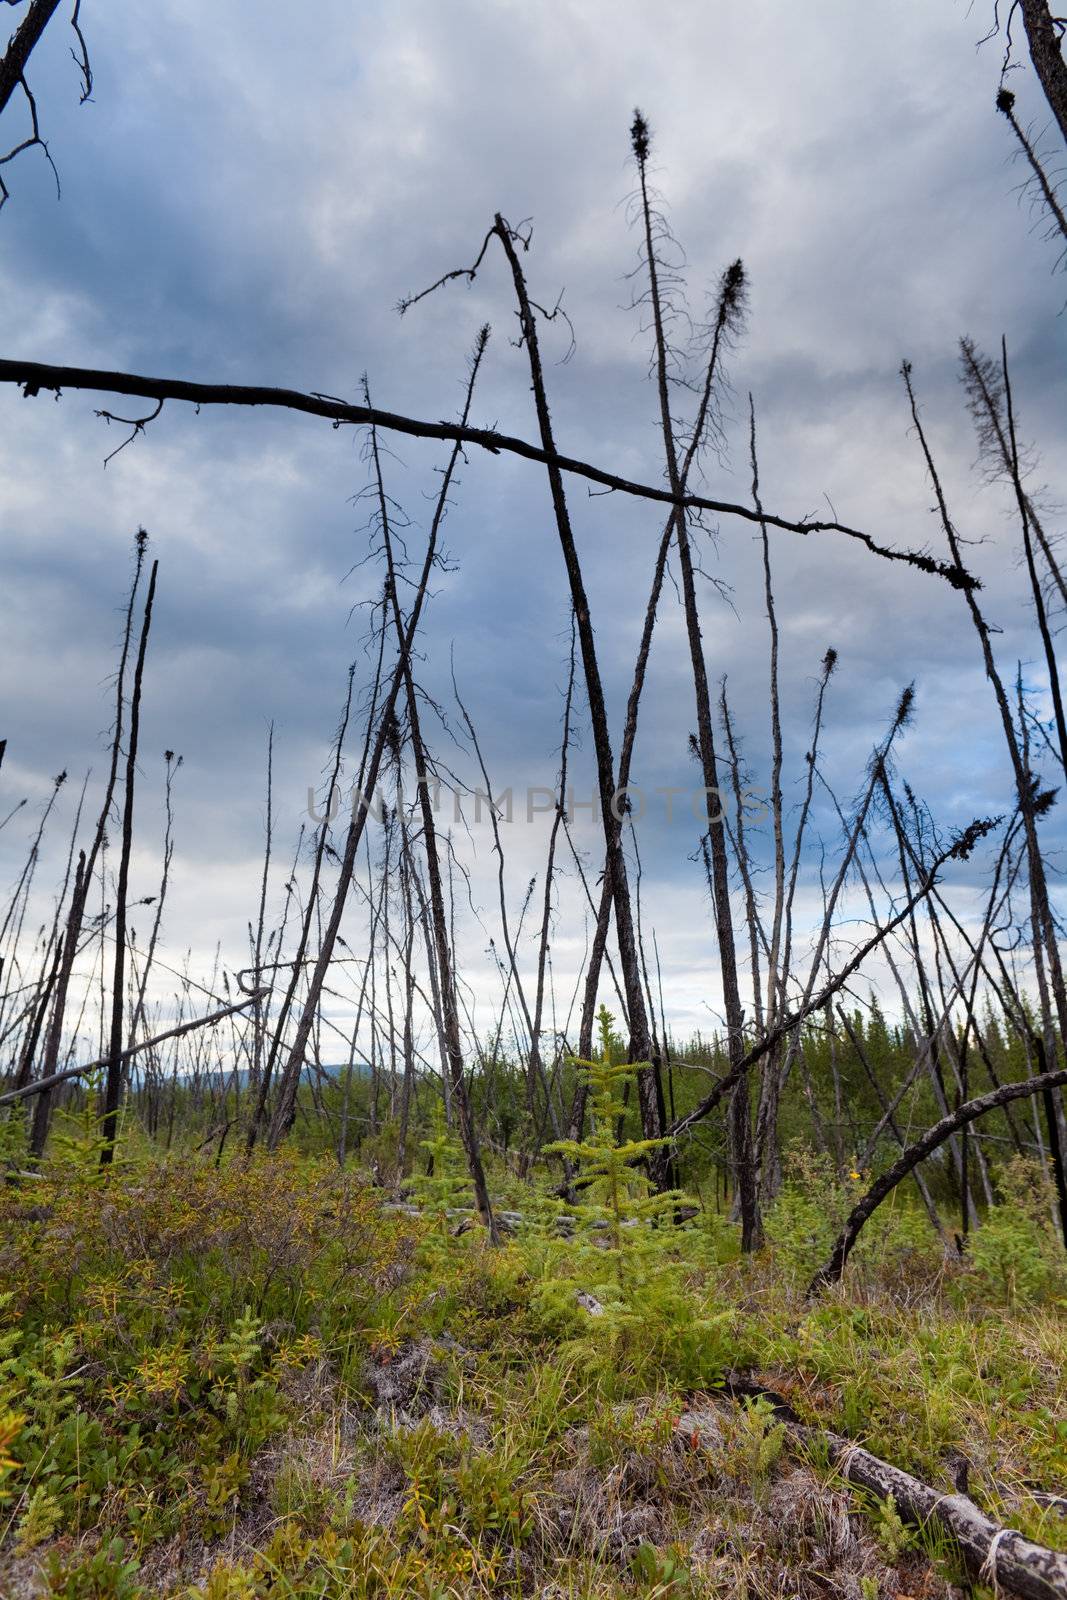 12 years after the forest fire, new trees are growing among charred logs.